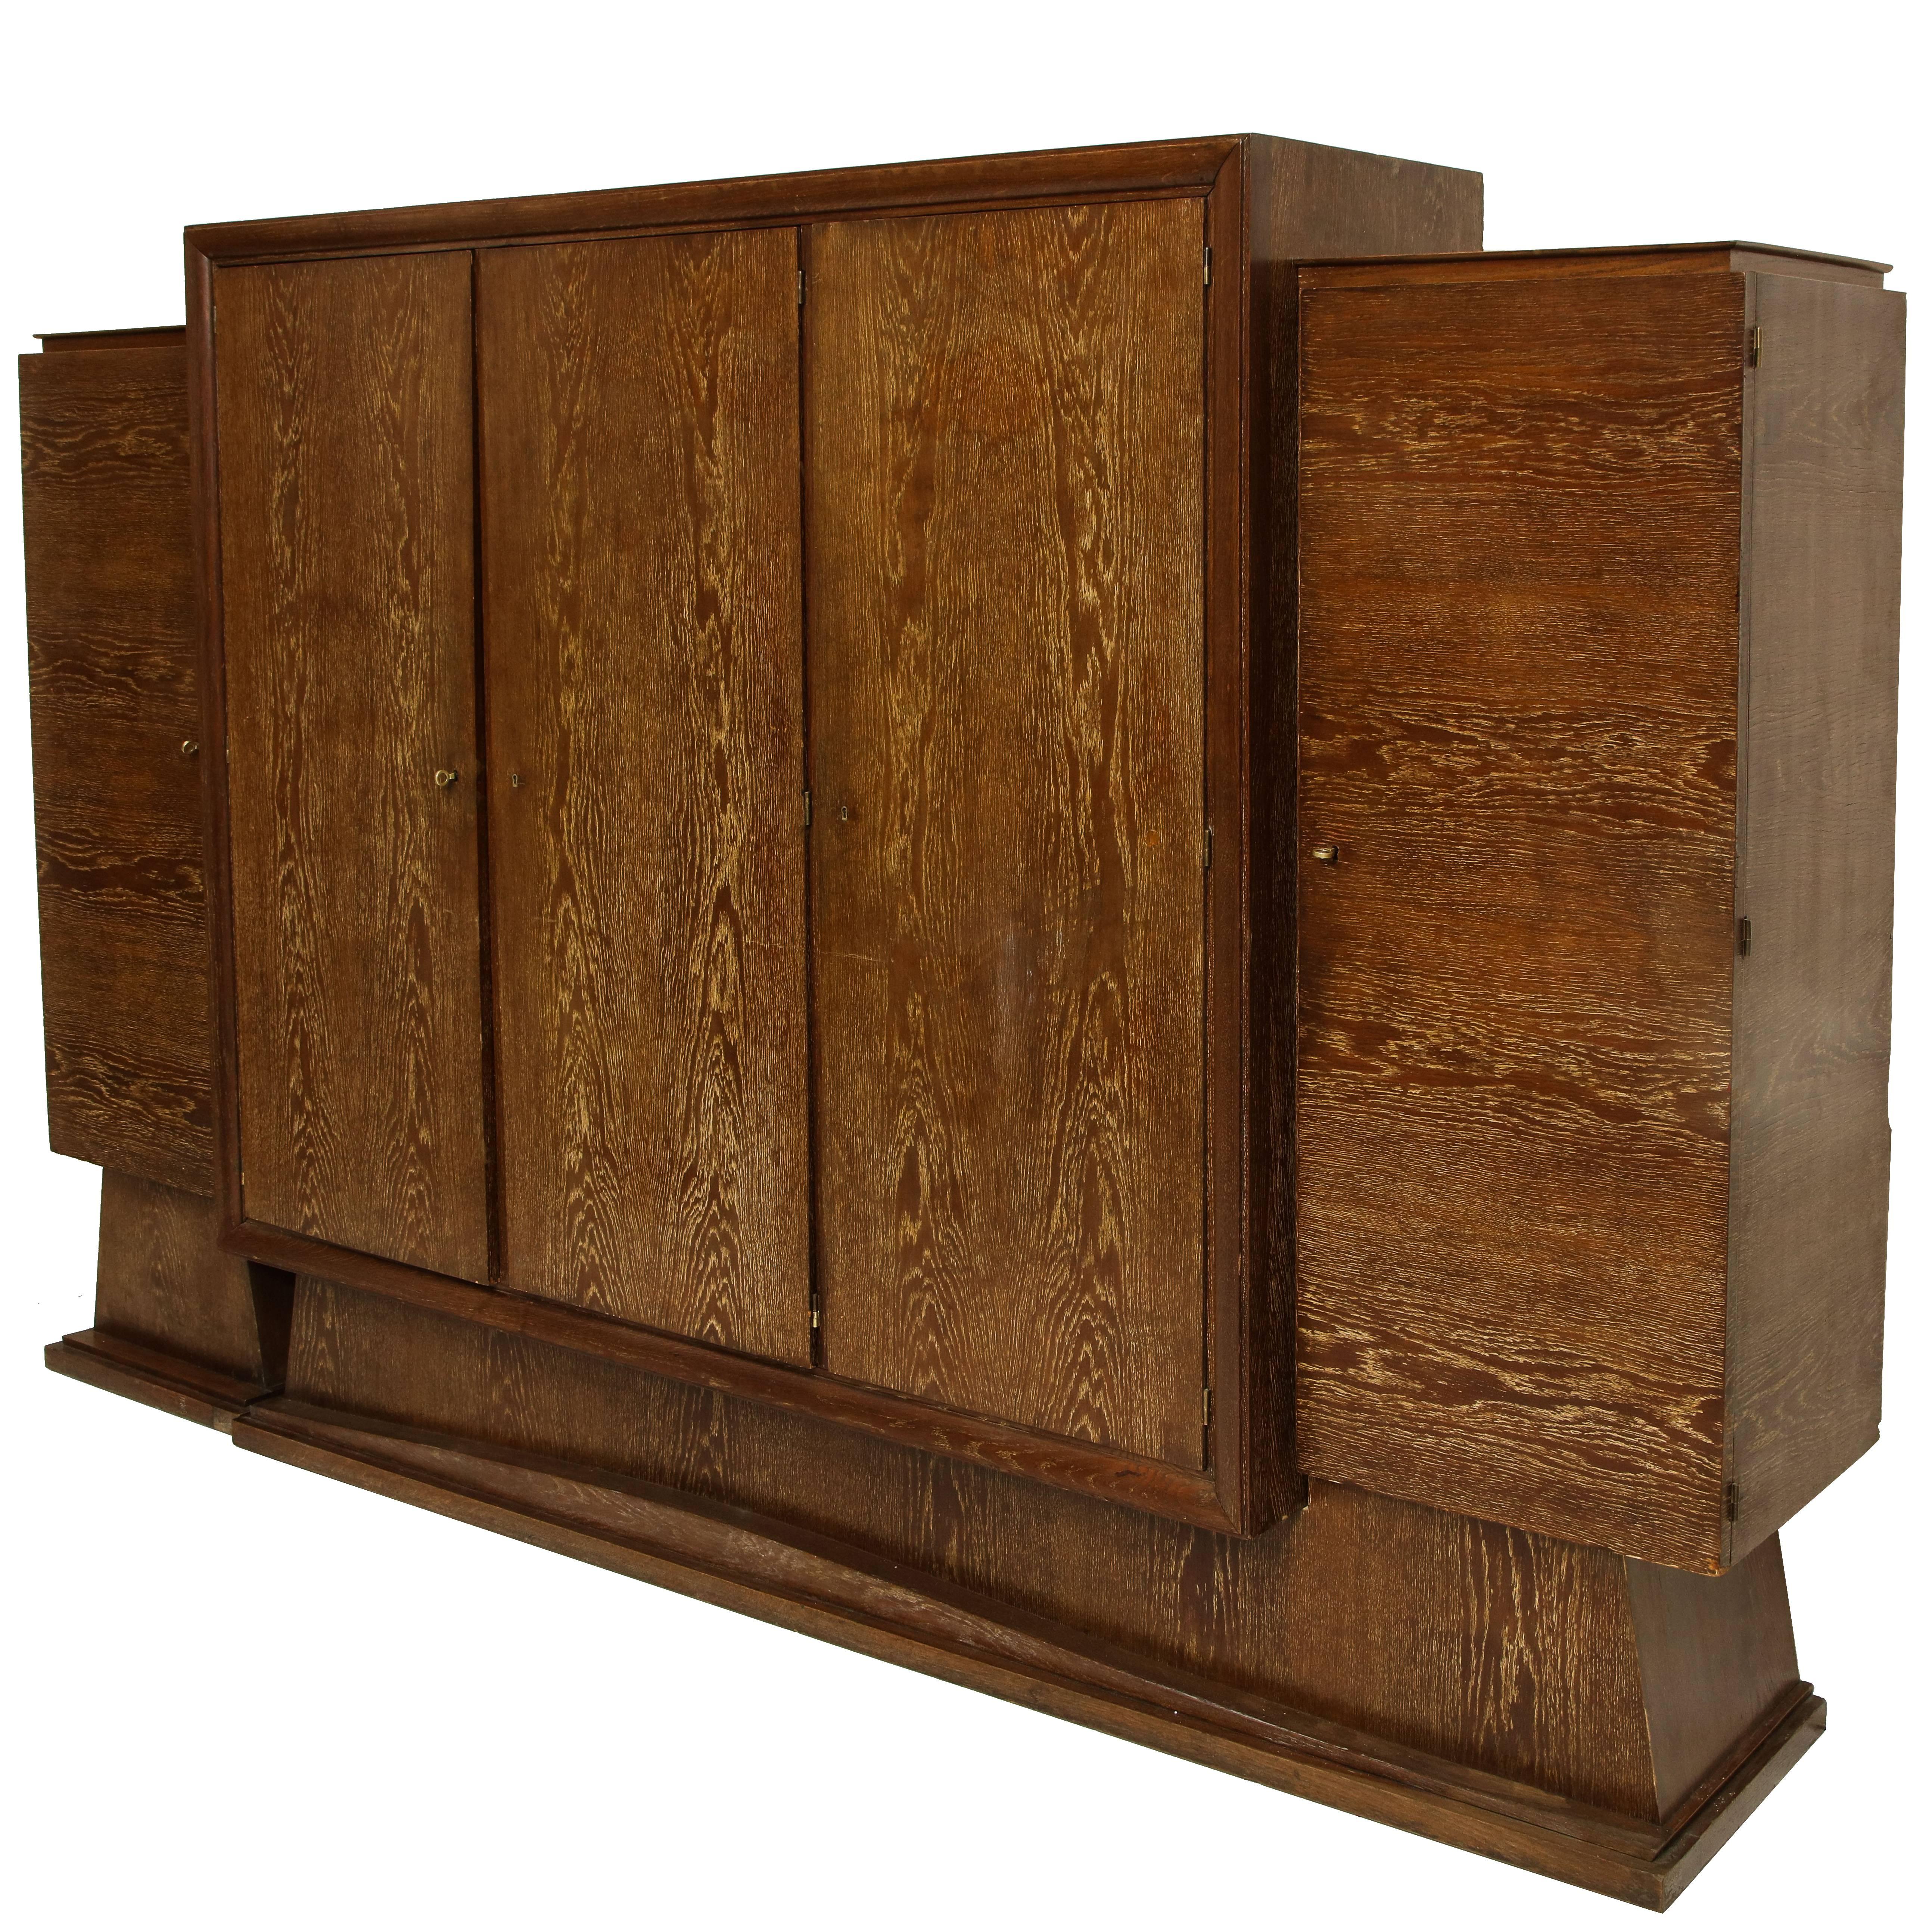 Monumental bookshelf wardrobe library cerused oak deco, France, 1940s, 1930s

Huge scale wardrobe or bookshelf or library in cerused oak from France deco period.
Clean lines. In lovely restored condition with original keys. Many shelves that